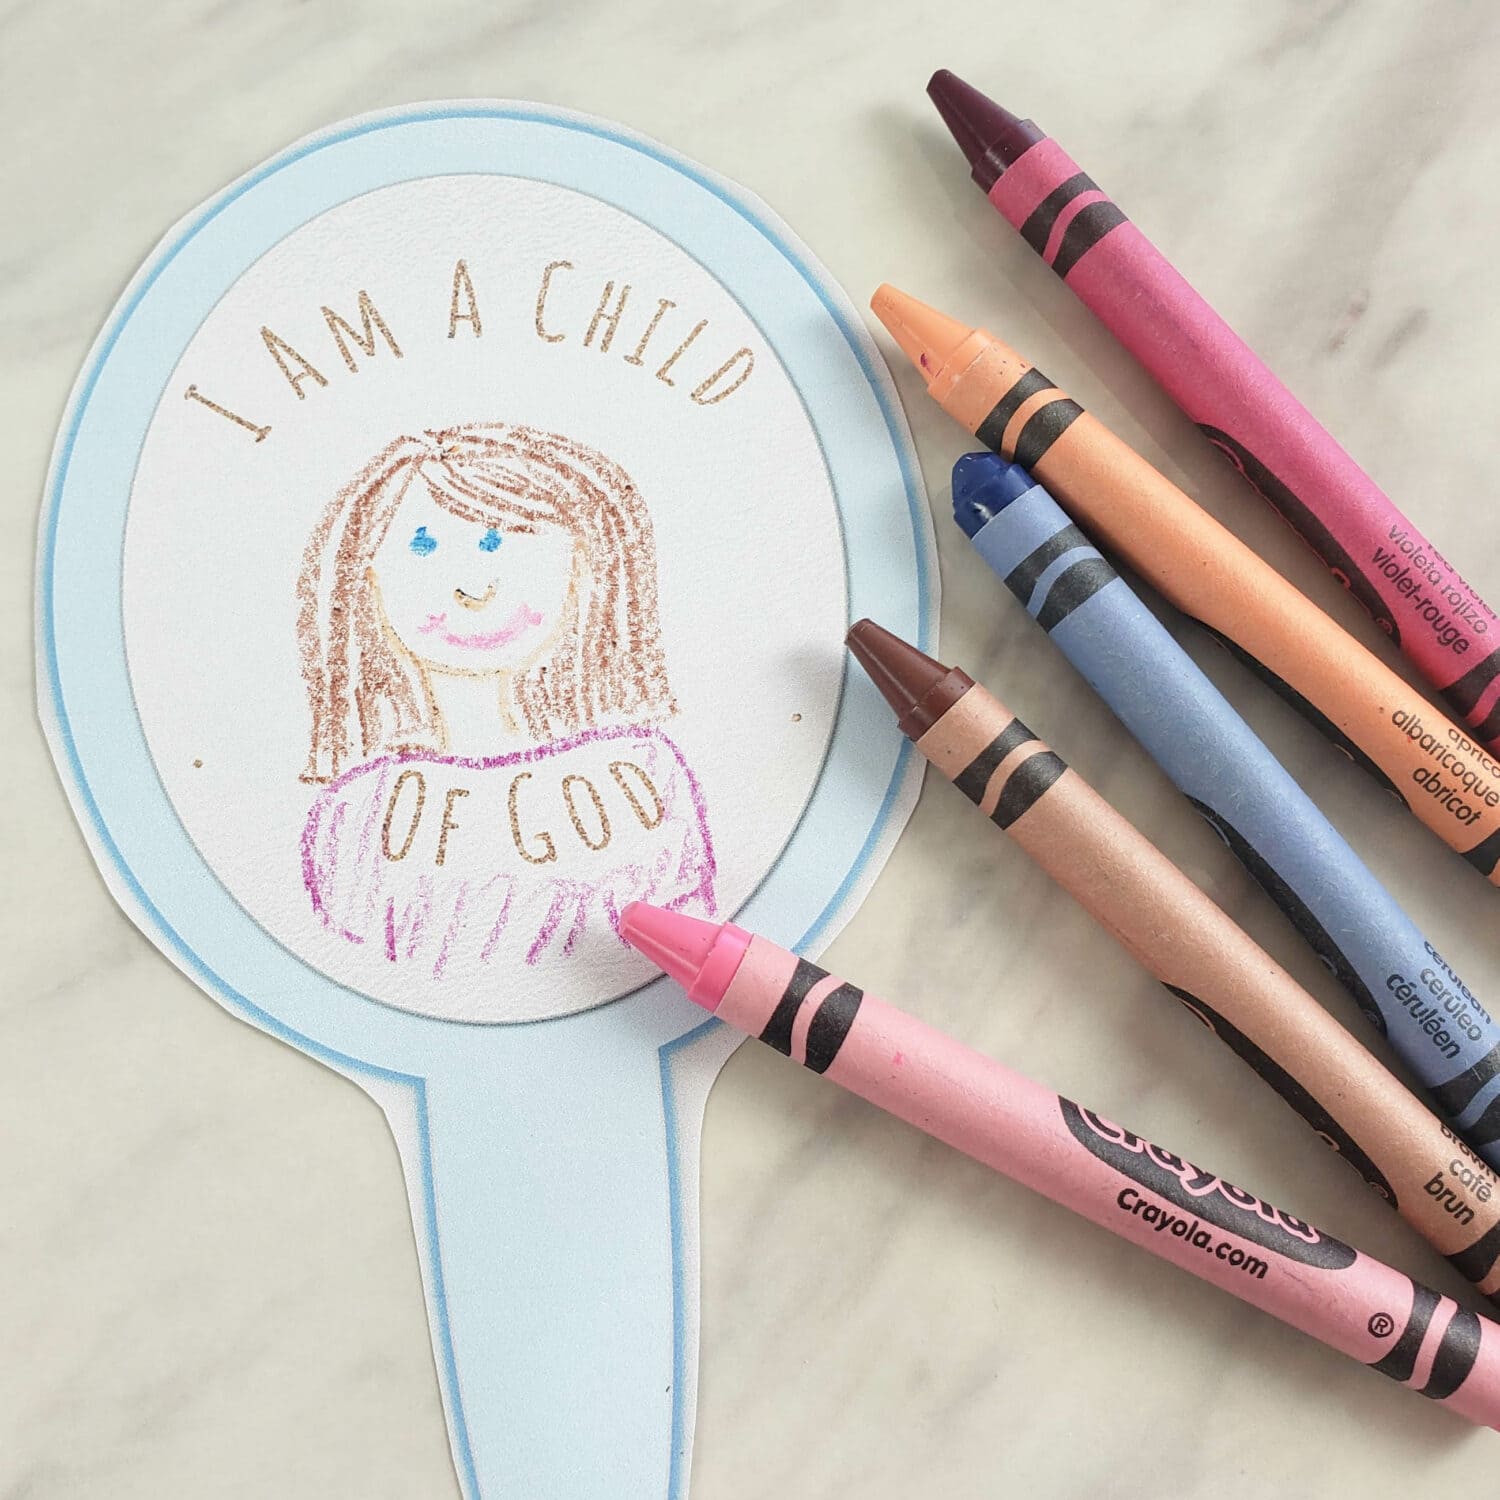 I Am a Child of God Mirror Pass primary singing time ideas using a real mirror or printable to teach about a child's identity and worth! Printable song helps for LDS Primary music leaders